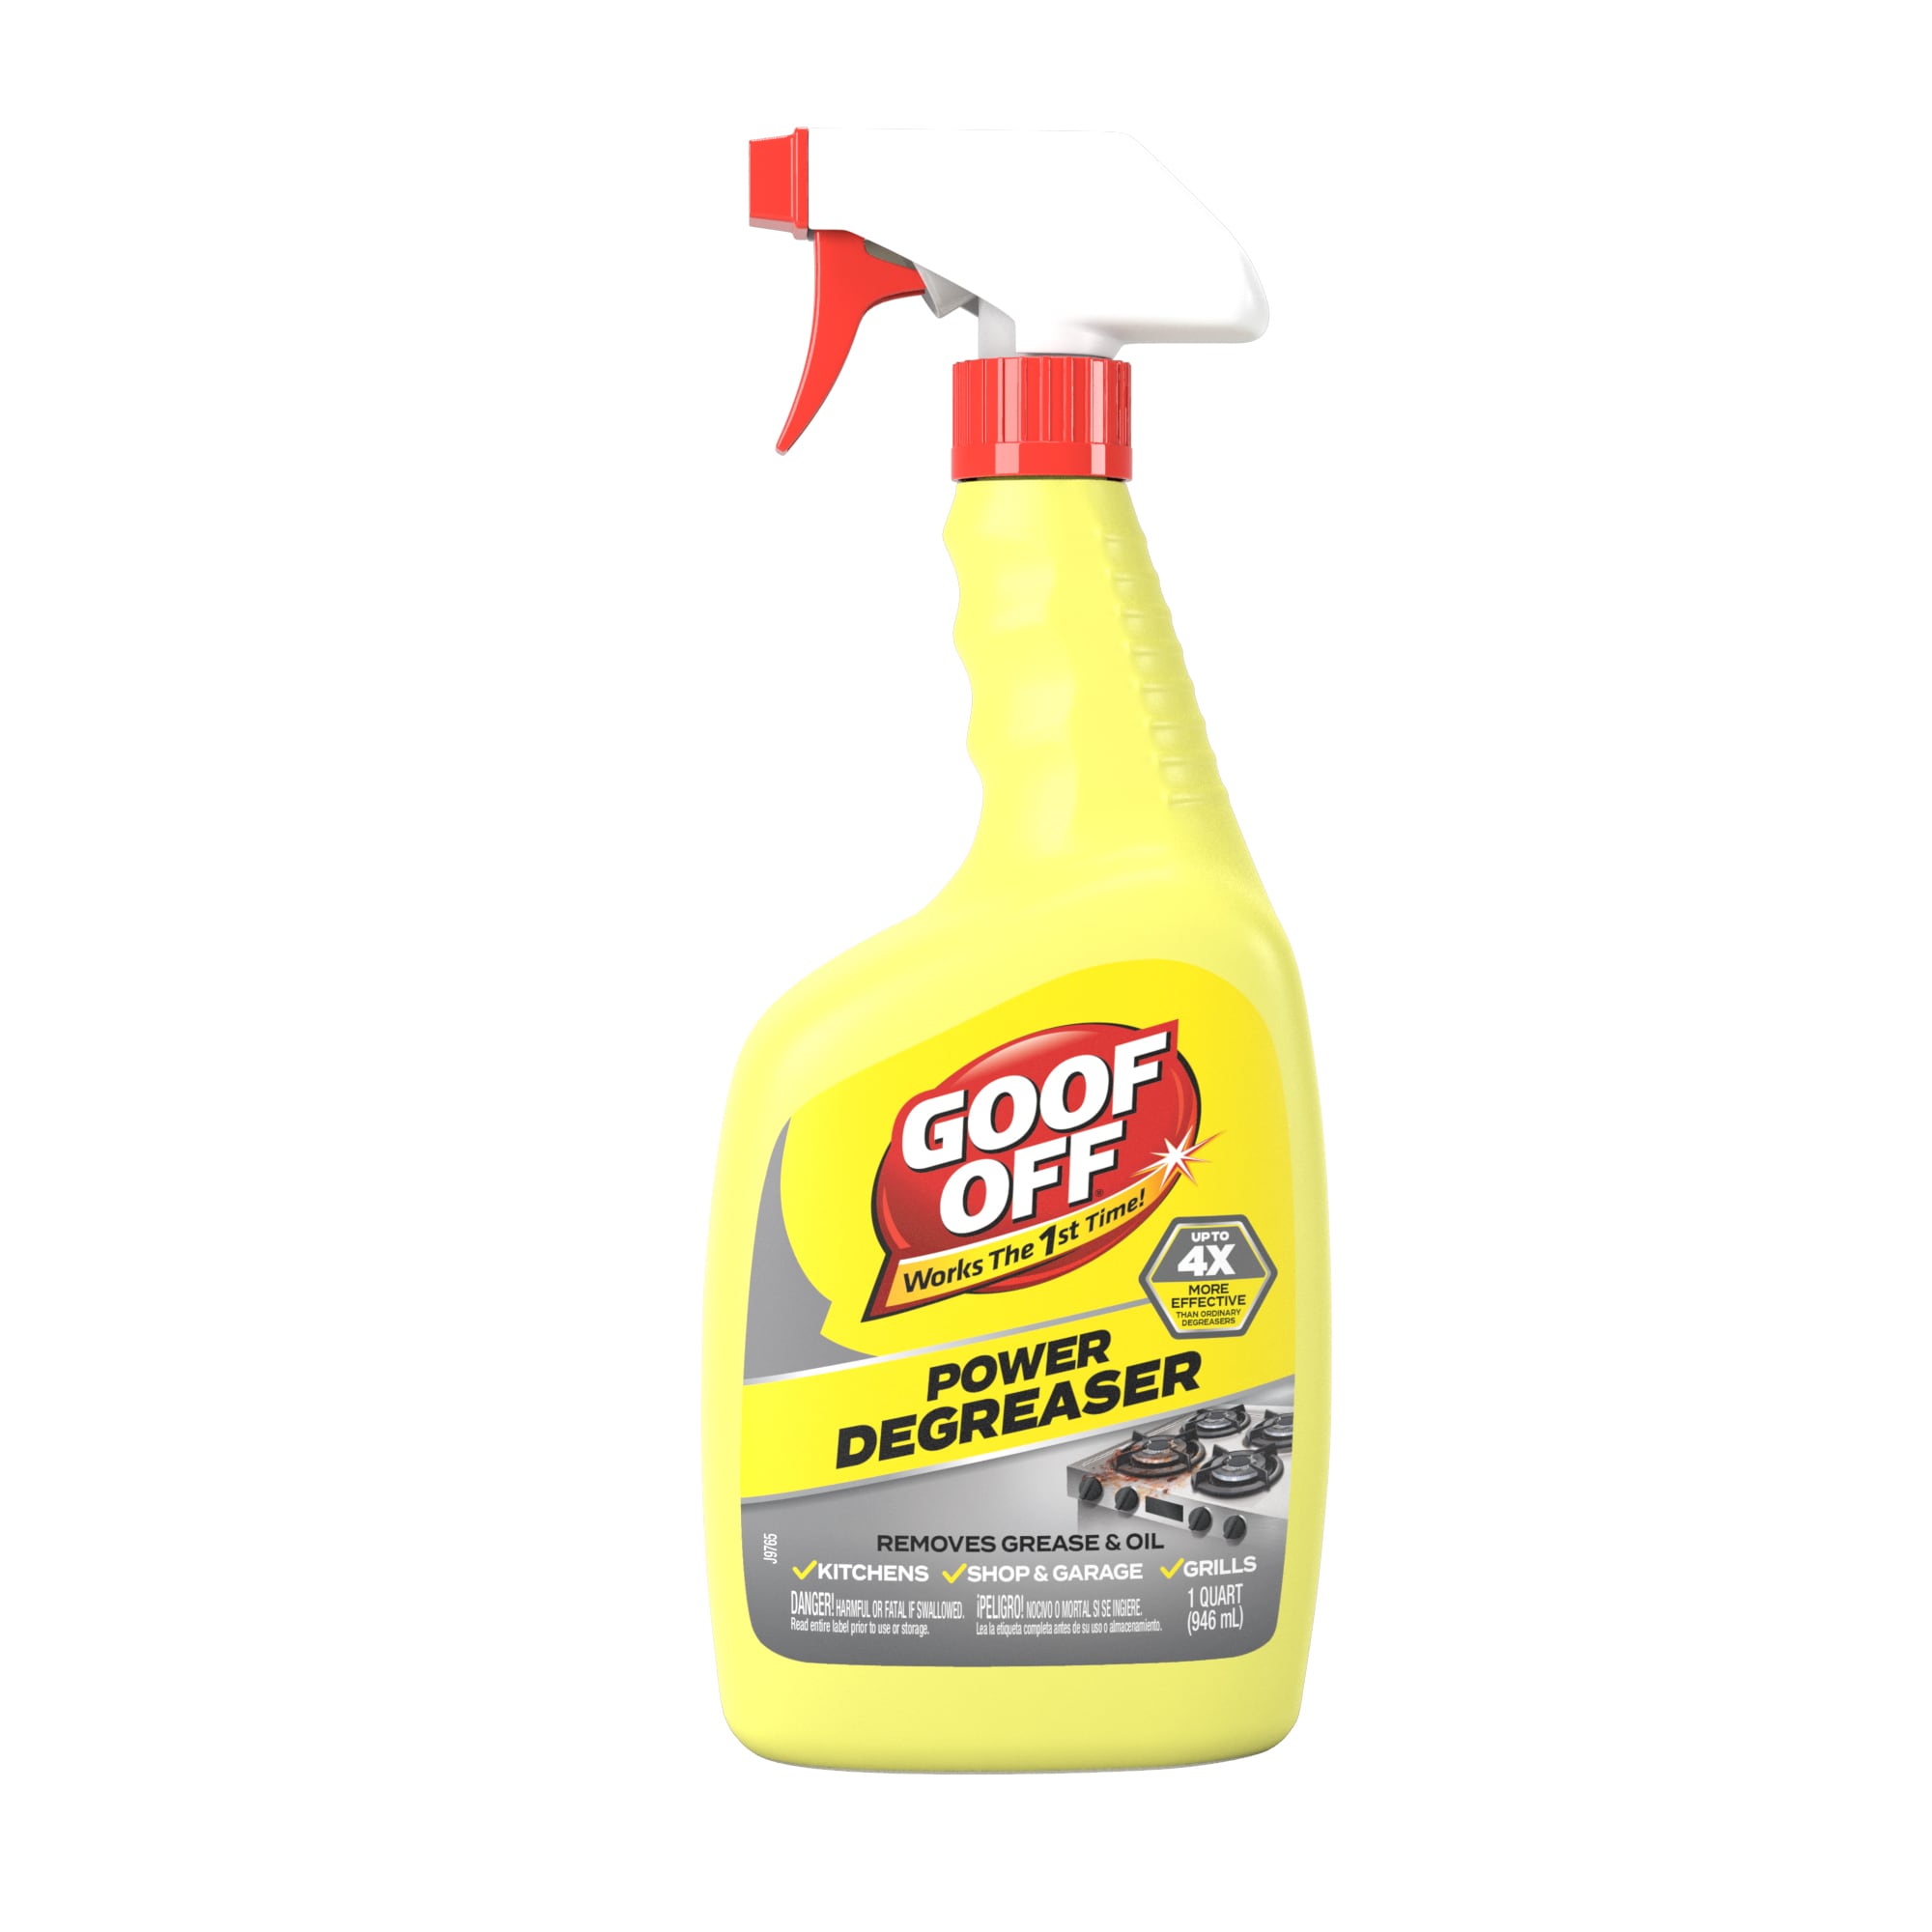 Goo Gone Kitchen Degreaser - Removes Kitchen Grease, Grime and